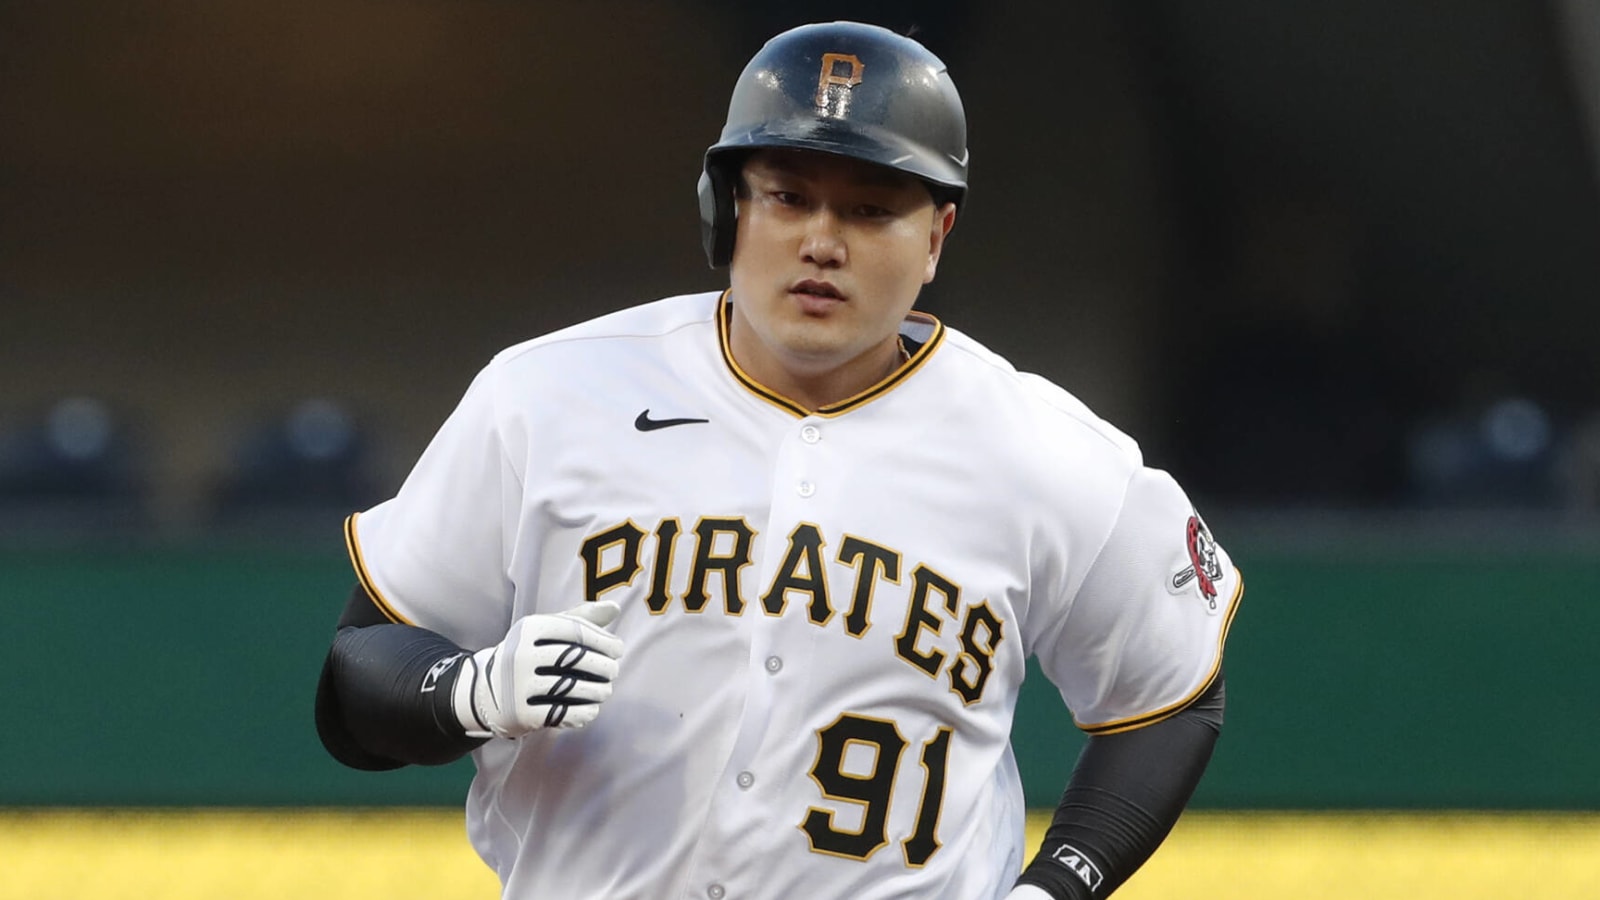 Pirates 1B expected to miss eight weeks